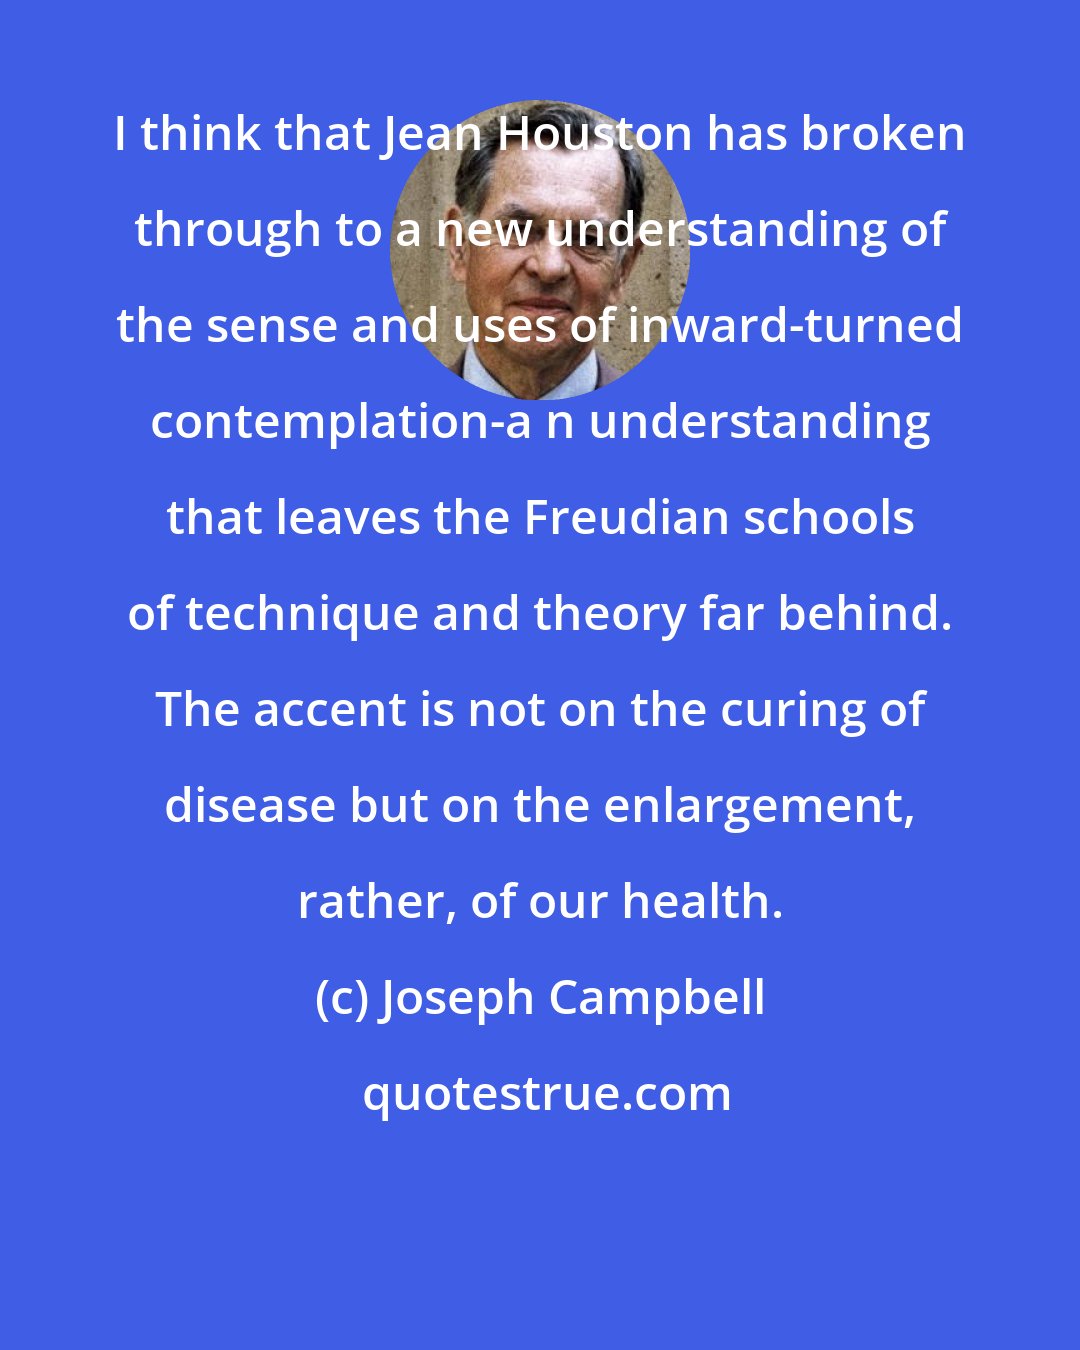 Joseph Campbell: I think that Jean Houston has broken through to a new understanding of the sense and uses of inward-turned contemplation-a n understanding that leaves the Freudian schools of technique and theory far behind. The accent is not on the curing of disease but on the enlargement, rather, of our health.